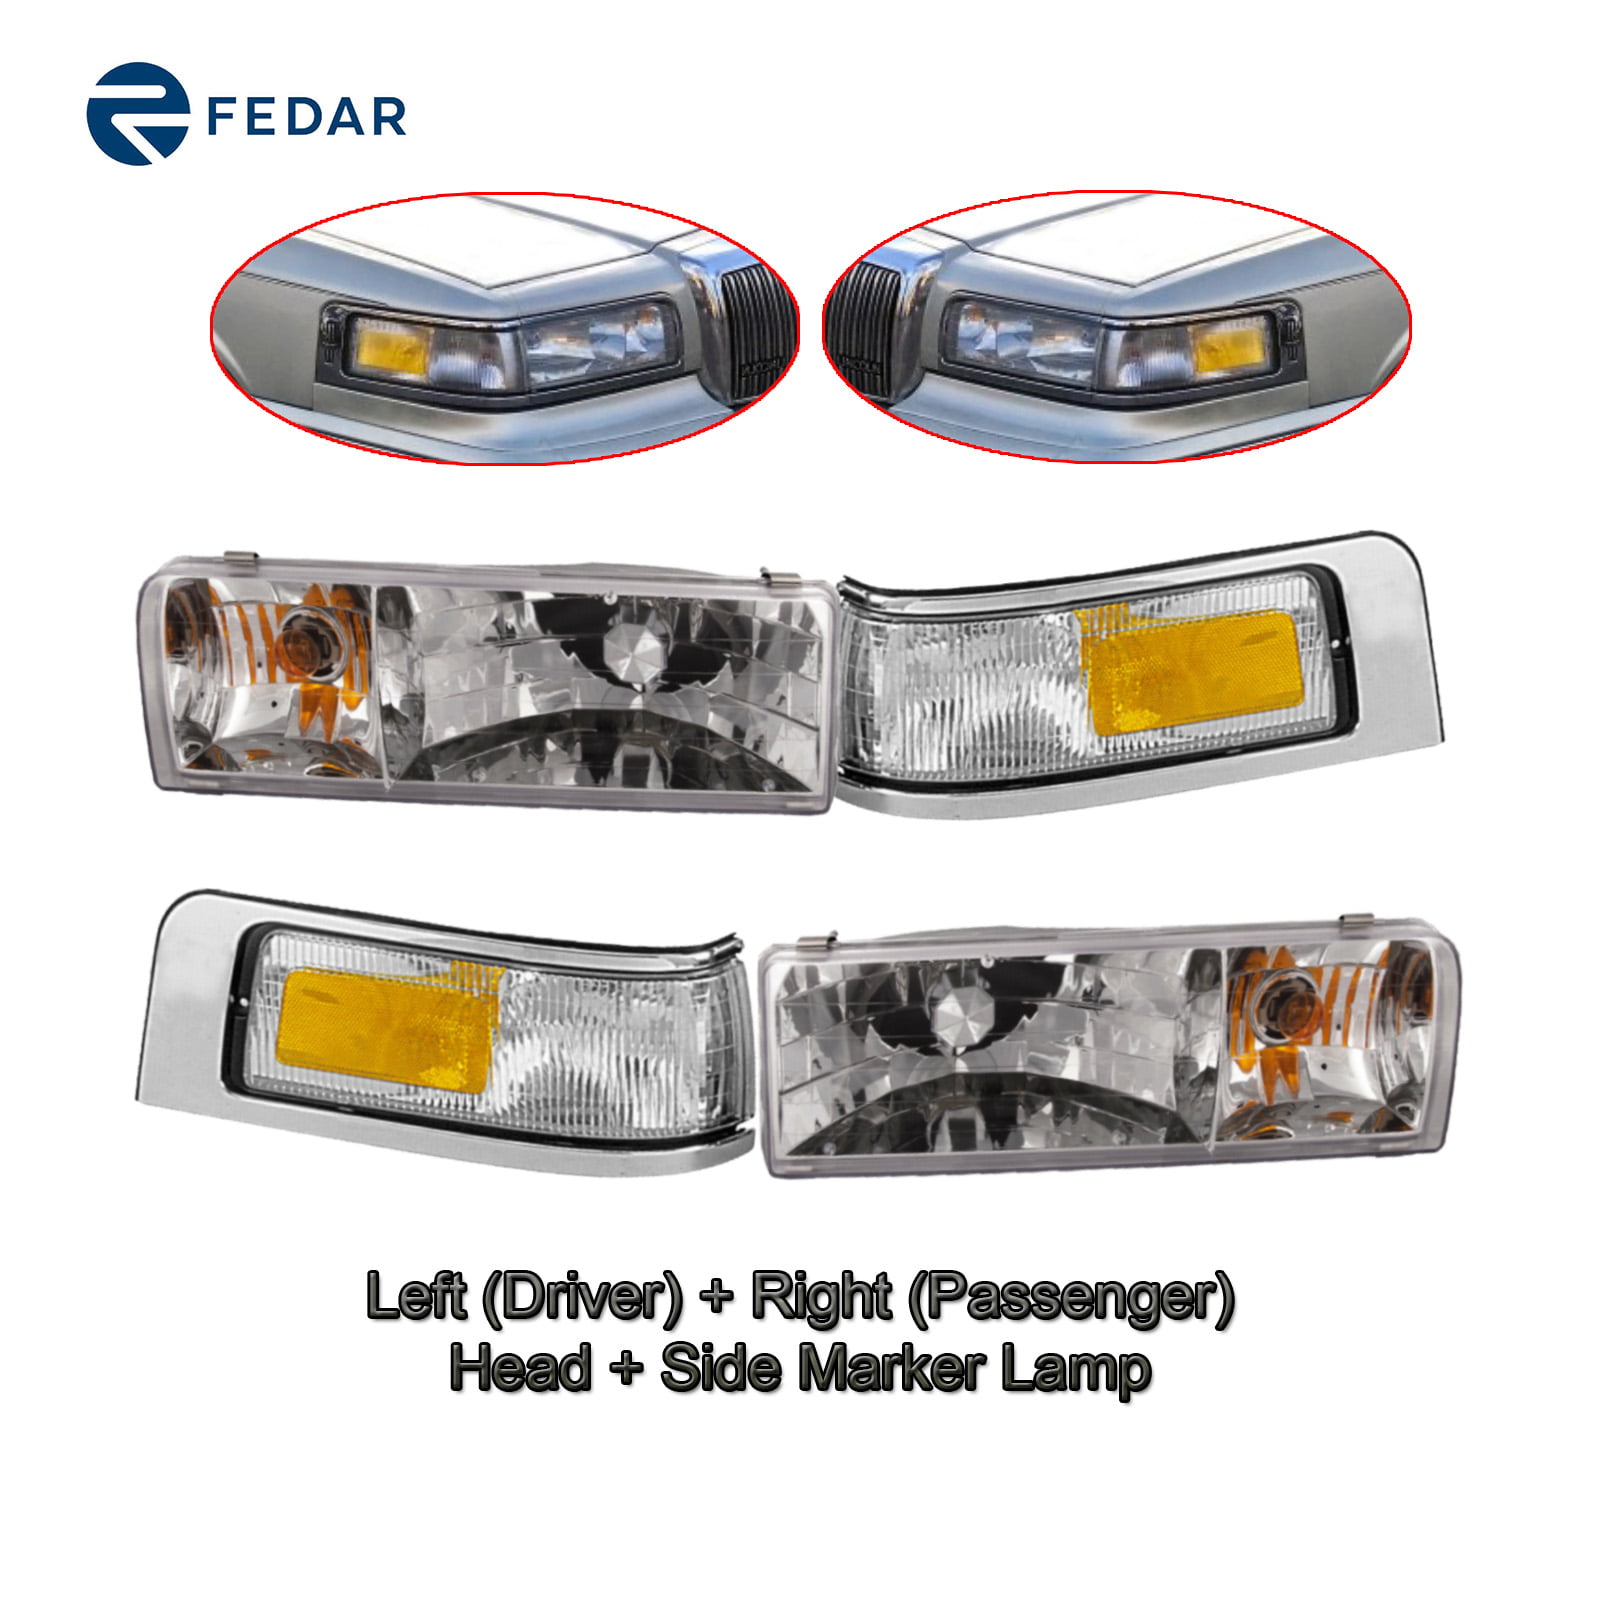 Headlight & Side Signal Light Compatible with 1995 1996 1997